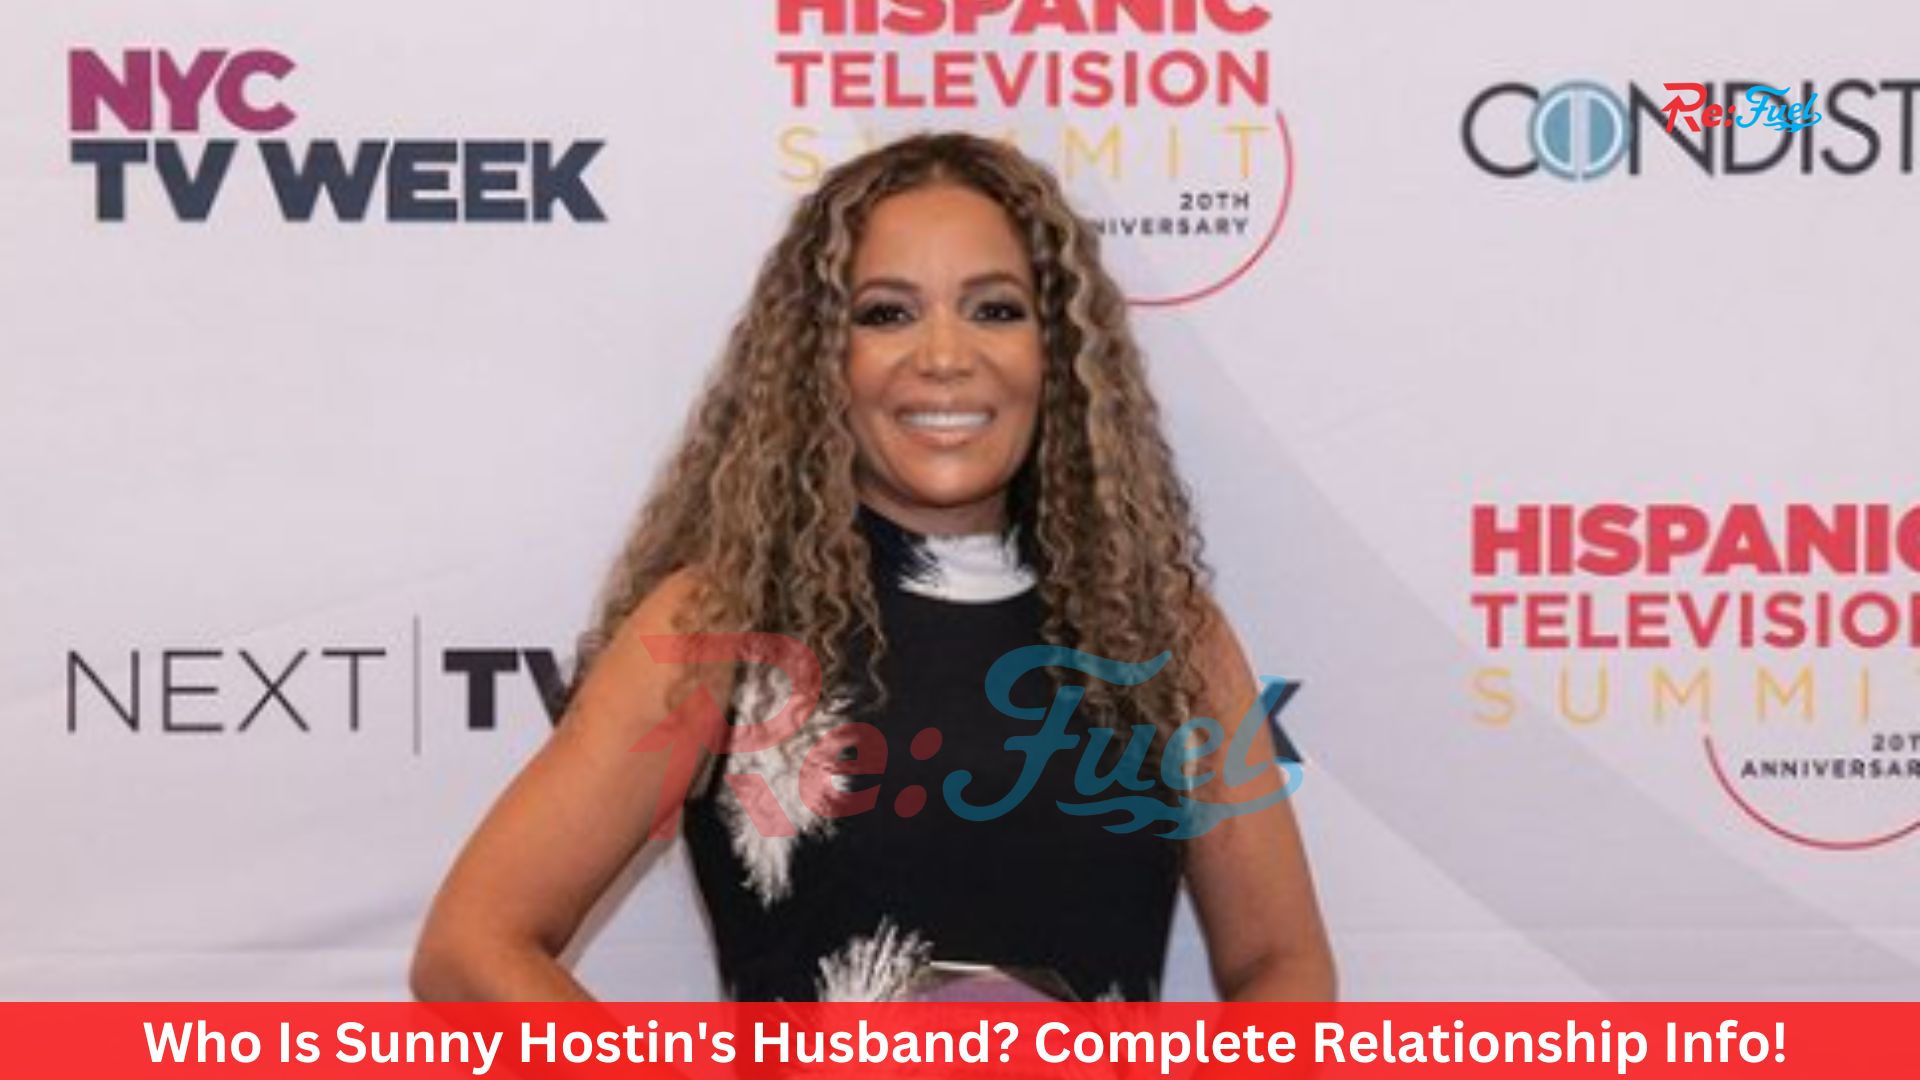 Who Is Sunny Hostin's Husband? Complete Relationship Info!